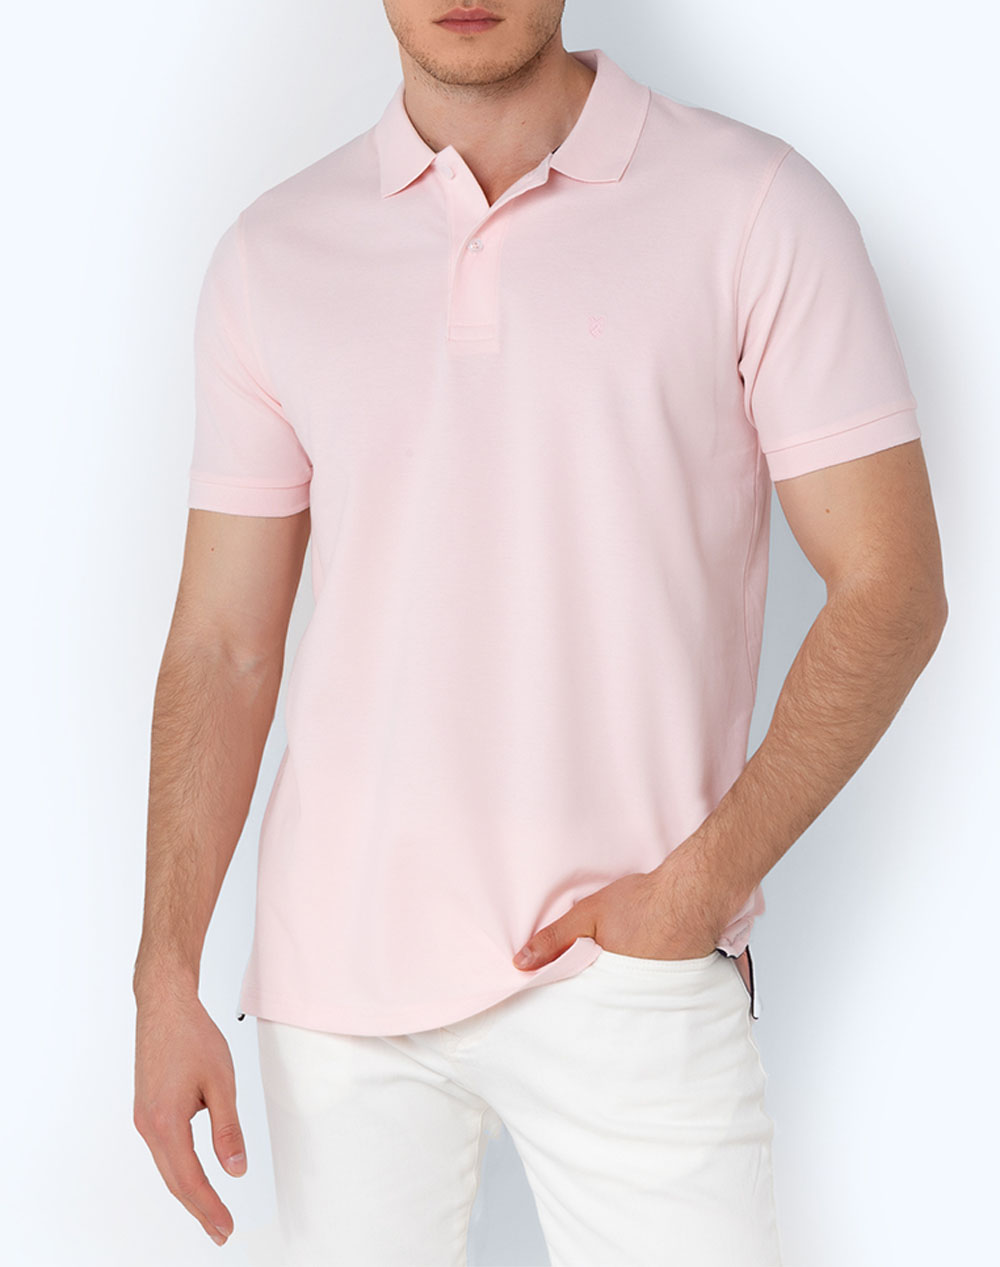 THE BOSTONIANS ΜΠΛΟΥΖΑ POLO PIQUE REGULAR FIT 3PS0001-PINK Pink 3820ABOST3410092_1893